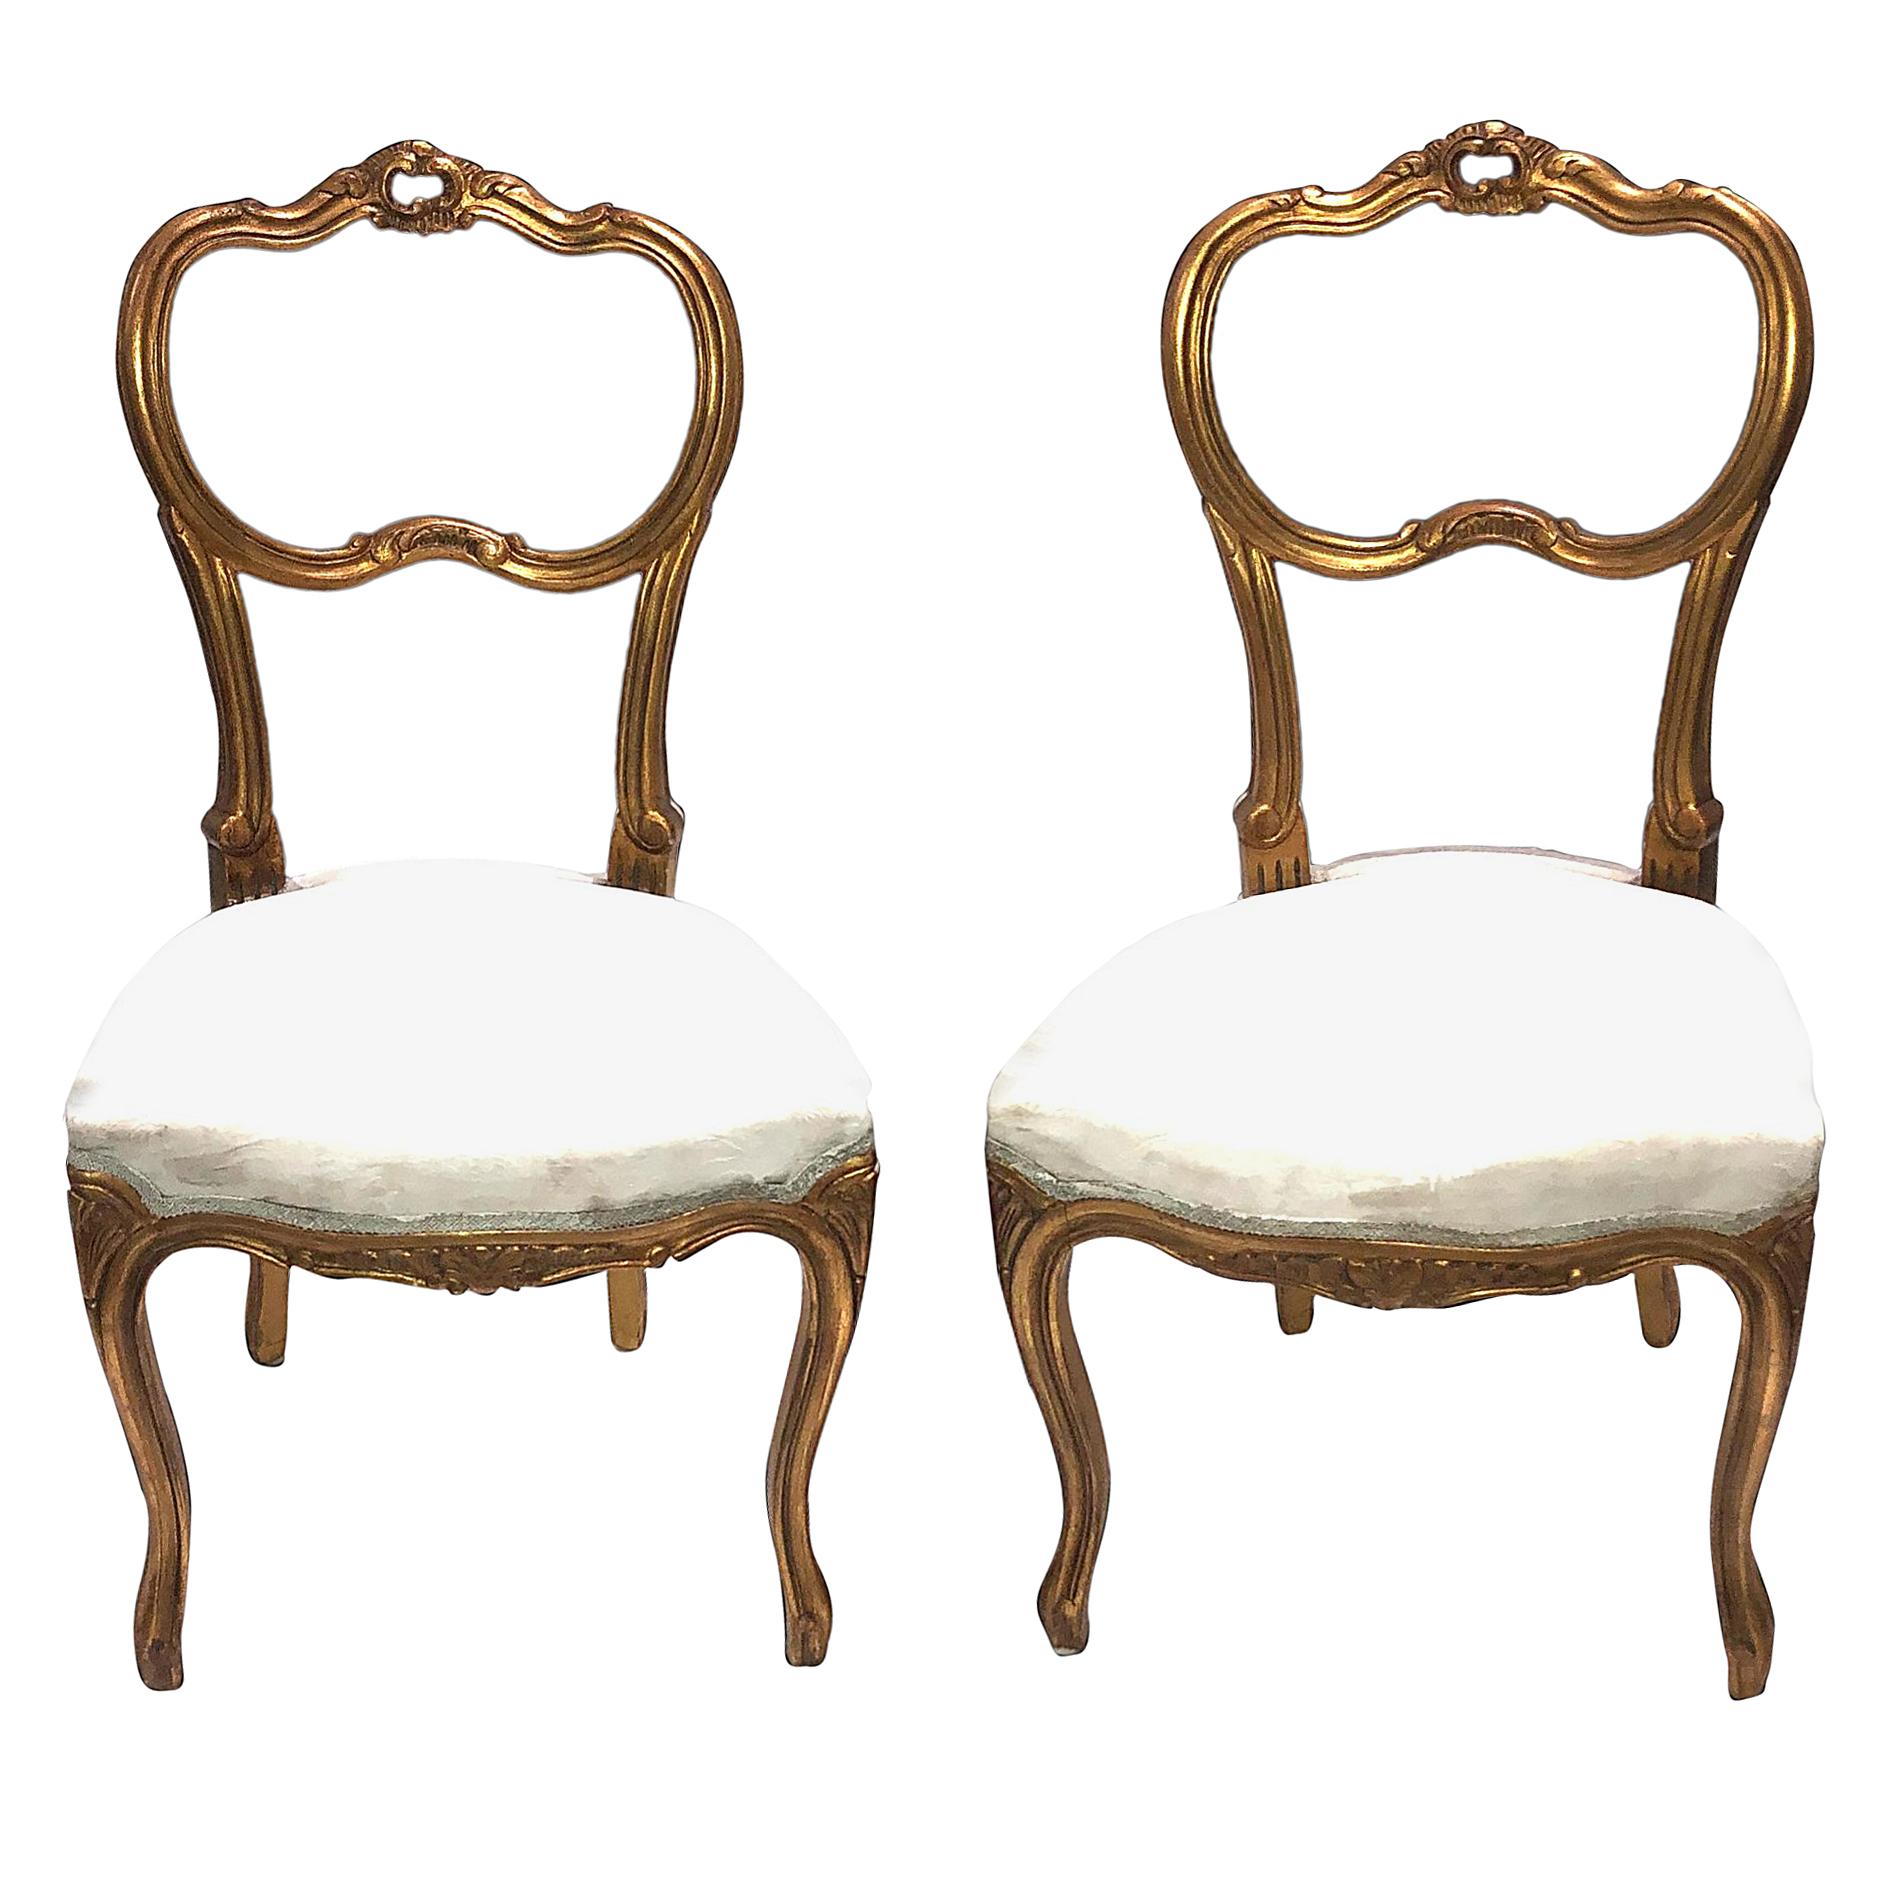 Pair of Giltwood Chairs, Shabby Chic Swedish Antique Farmhouse Style, 1920s